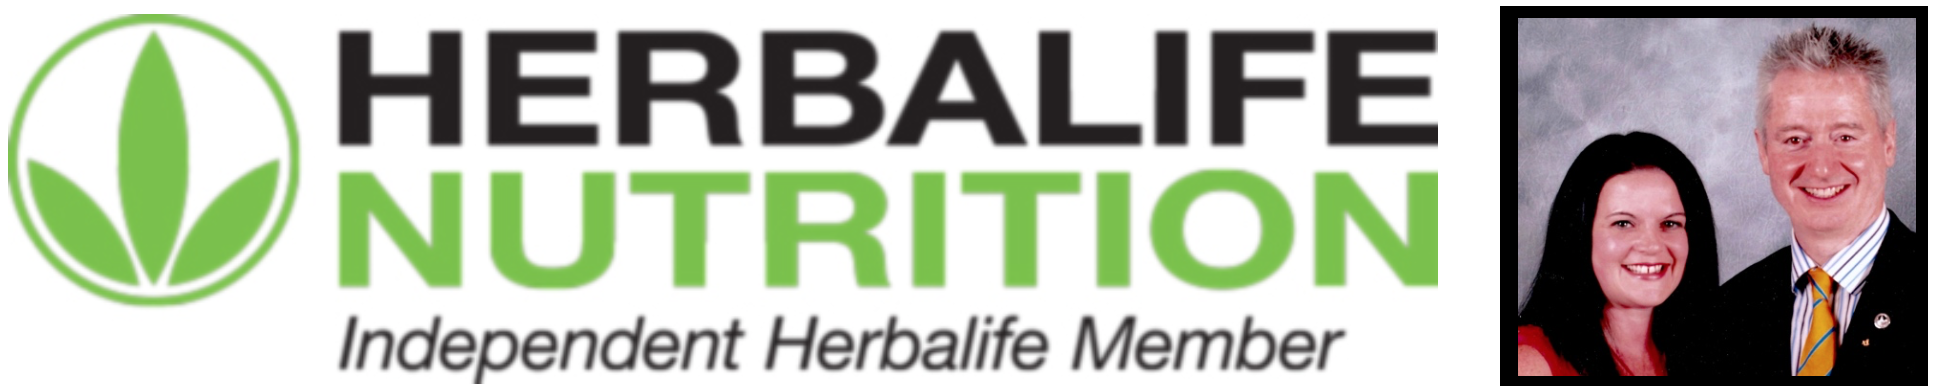 Paul and Beccy Hopfensperger - Herbalife Independent Members since 1987